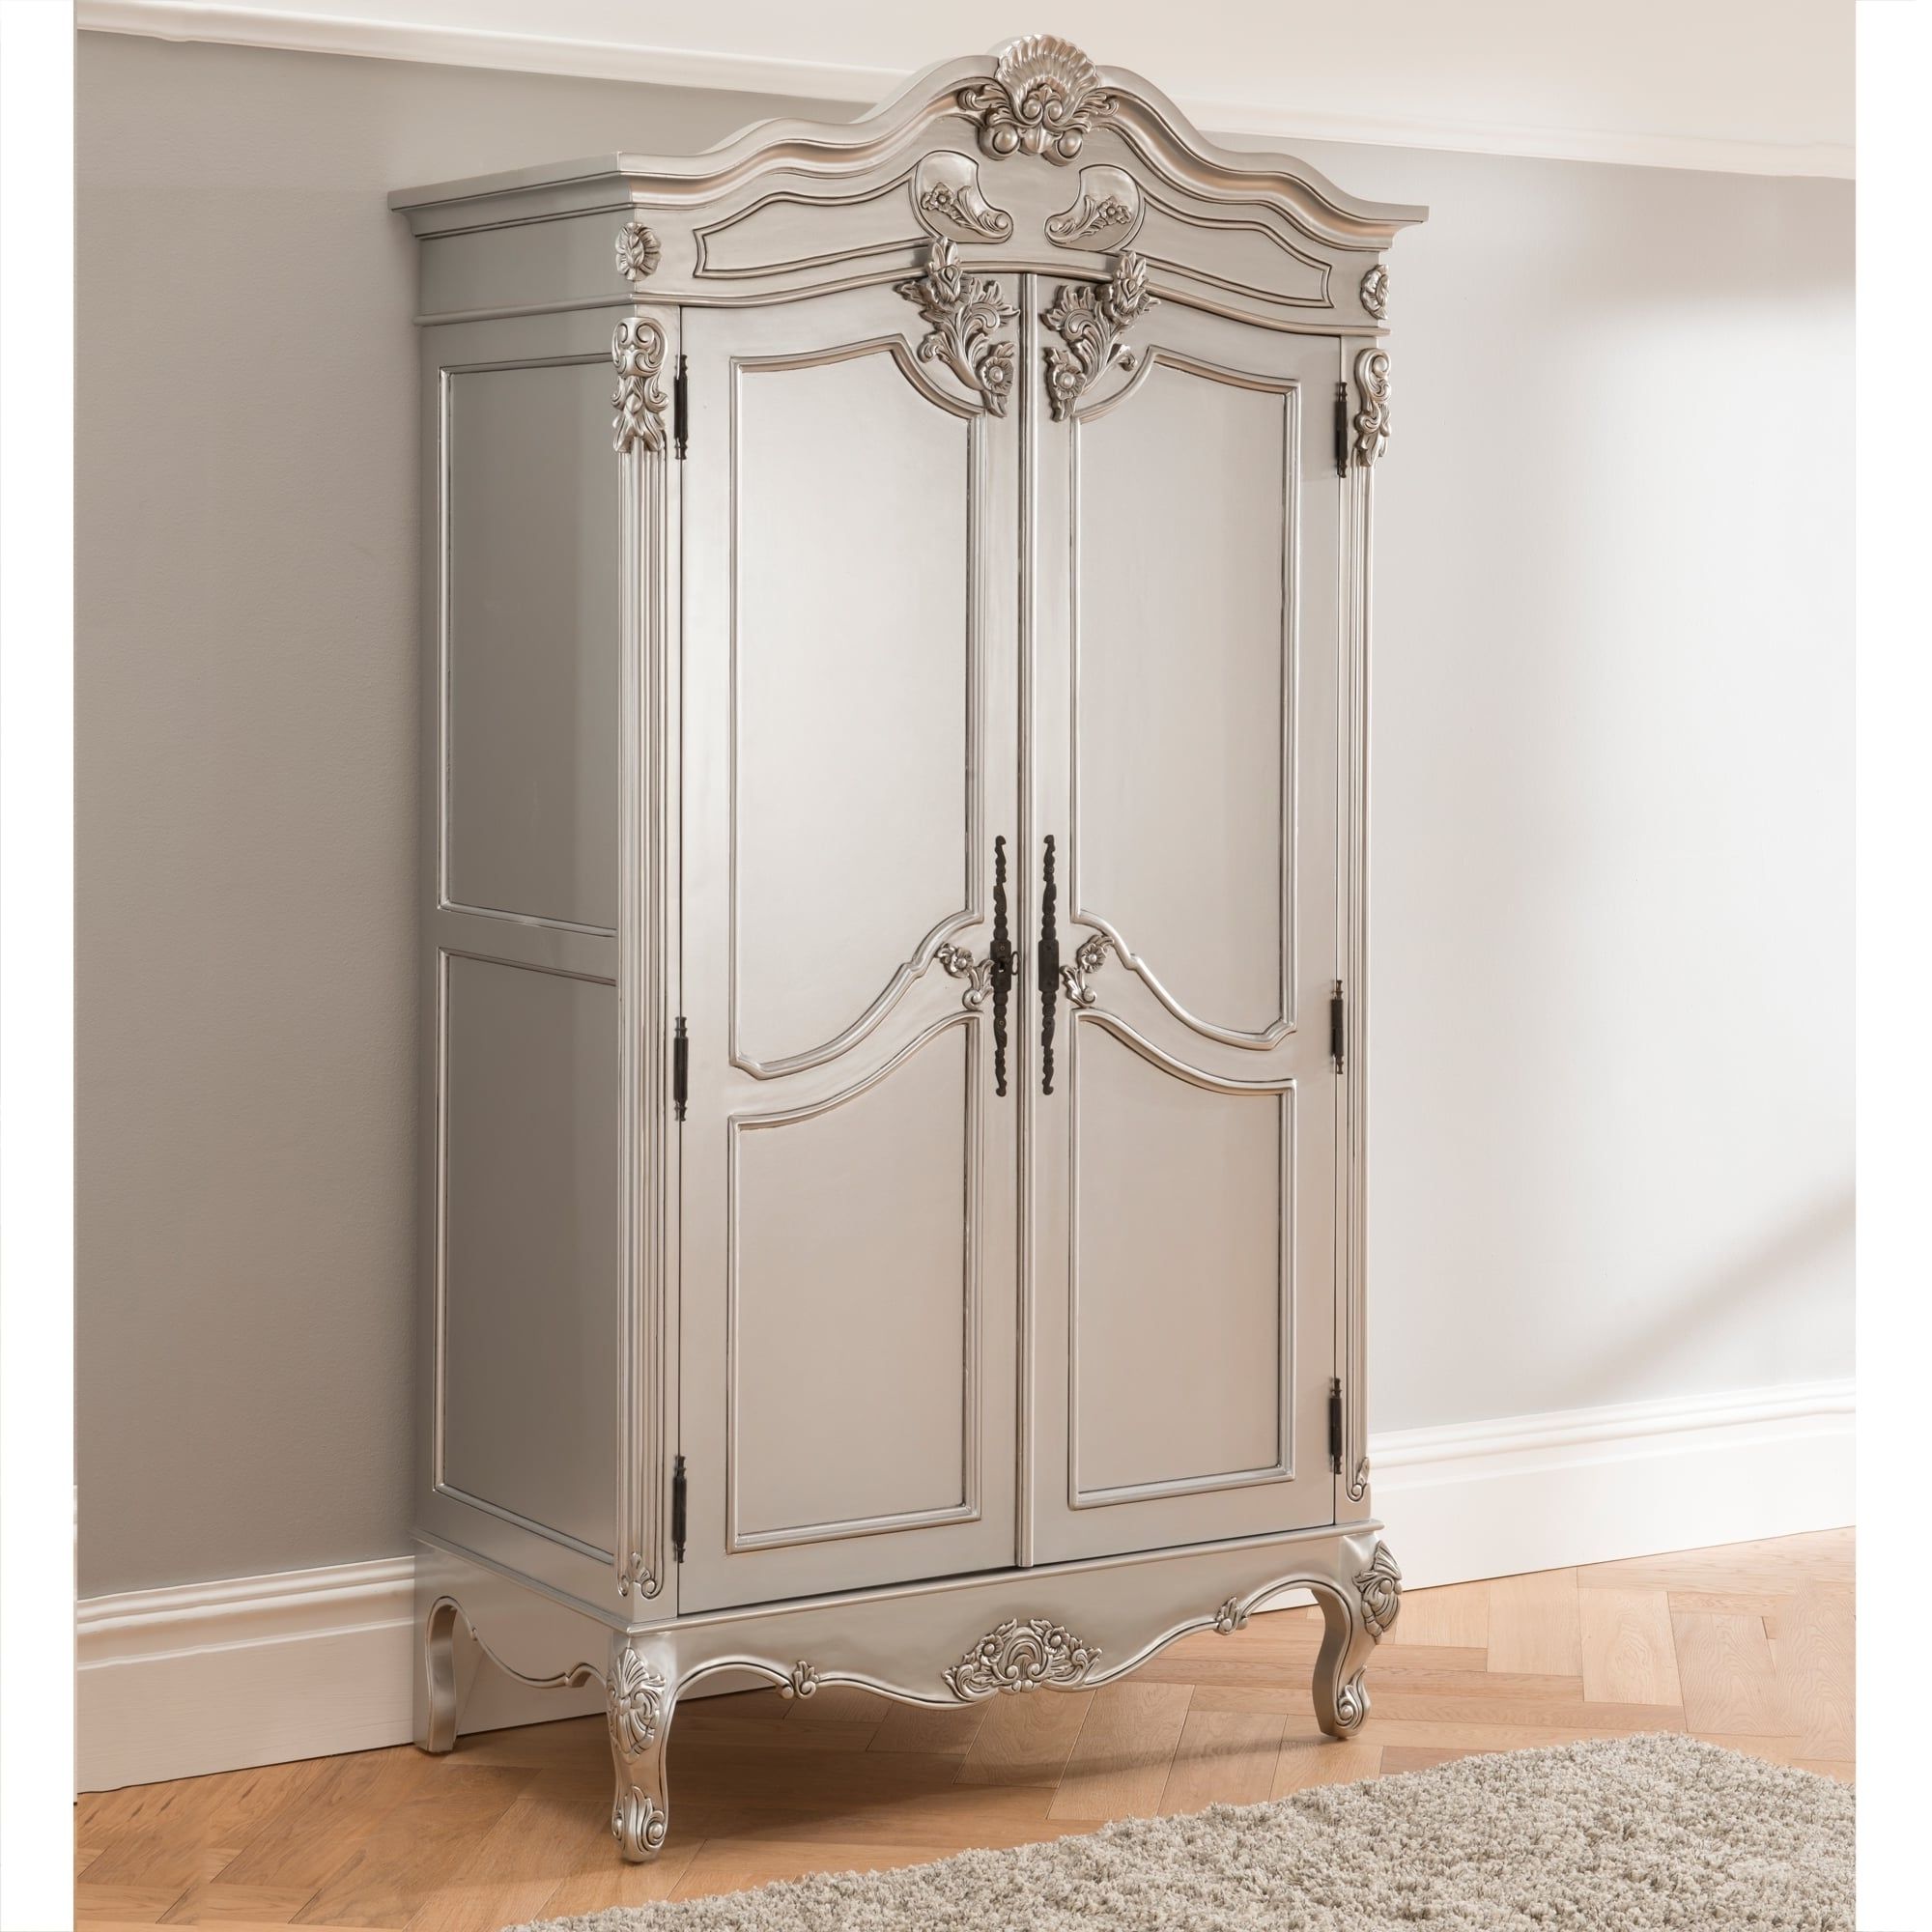 Baroque Antique French Wardrobe Works Exceptional Alongside Our Regarding Best And Newest 3 Door French Wardrobes (View 13 of 15)